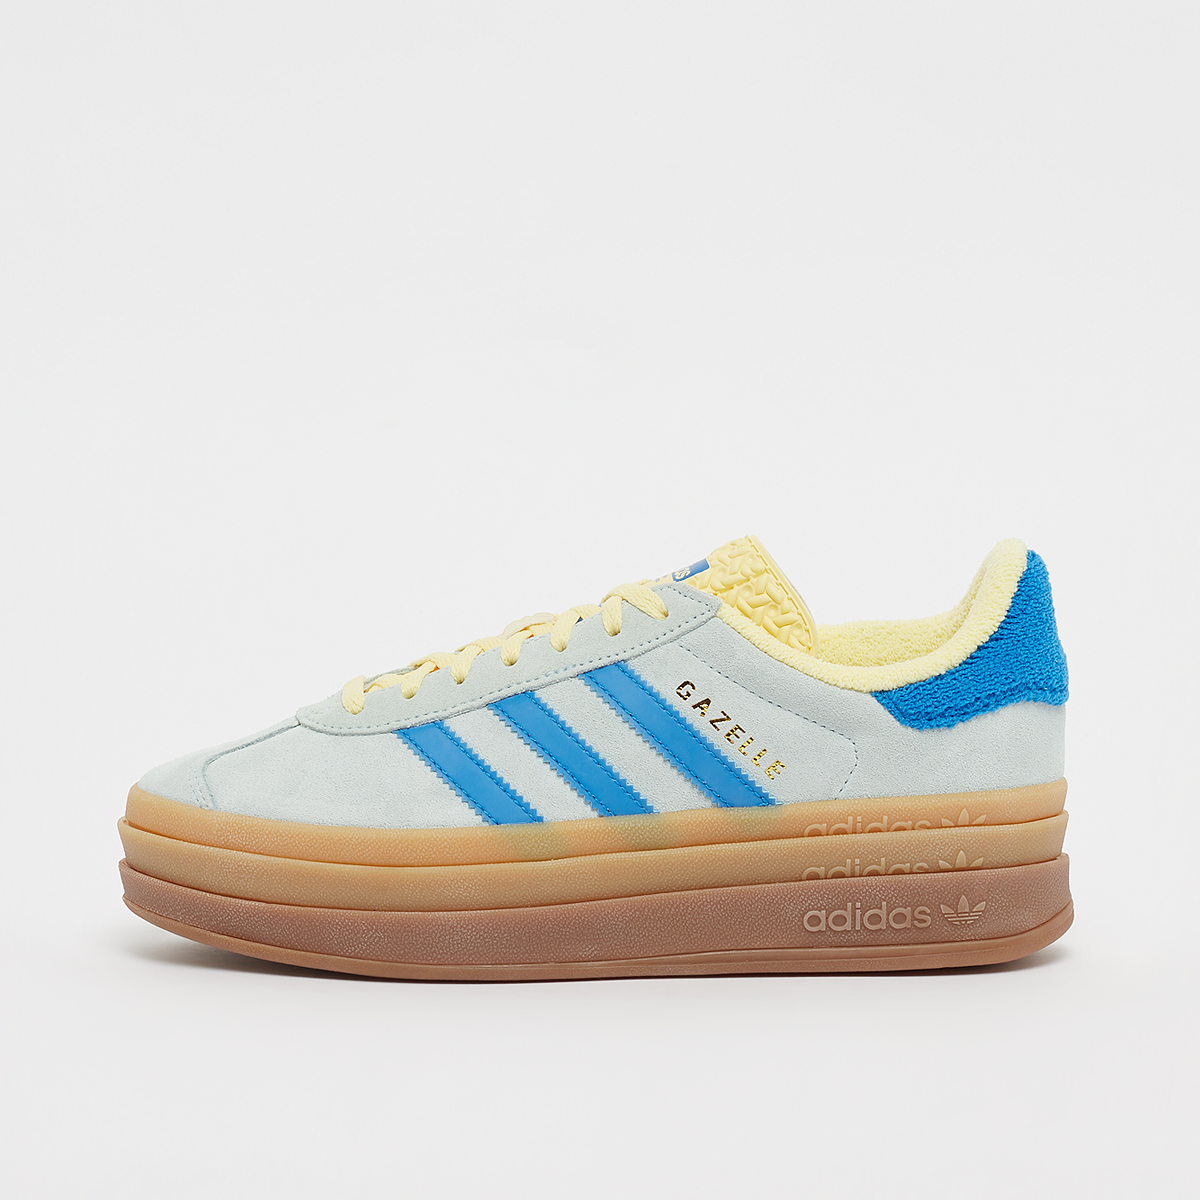 Sneaker Gazelle Bold W, adidas Originals, Footwear, almost blue/bright blue/almost yellow, taille: 36 2/3